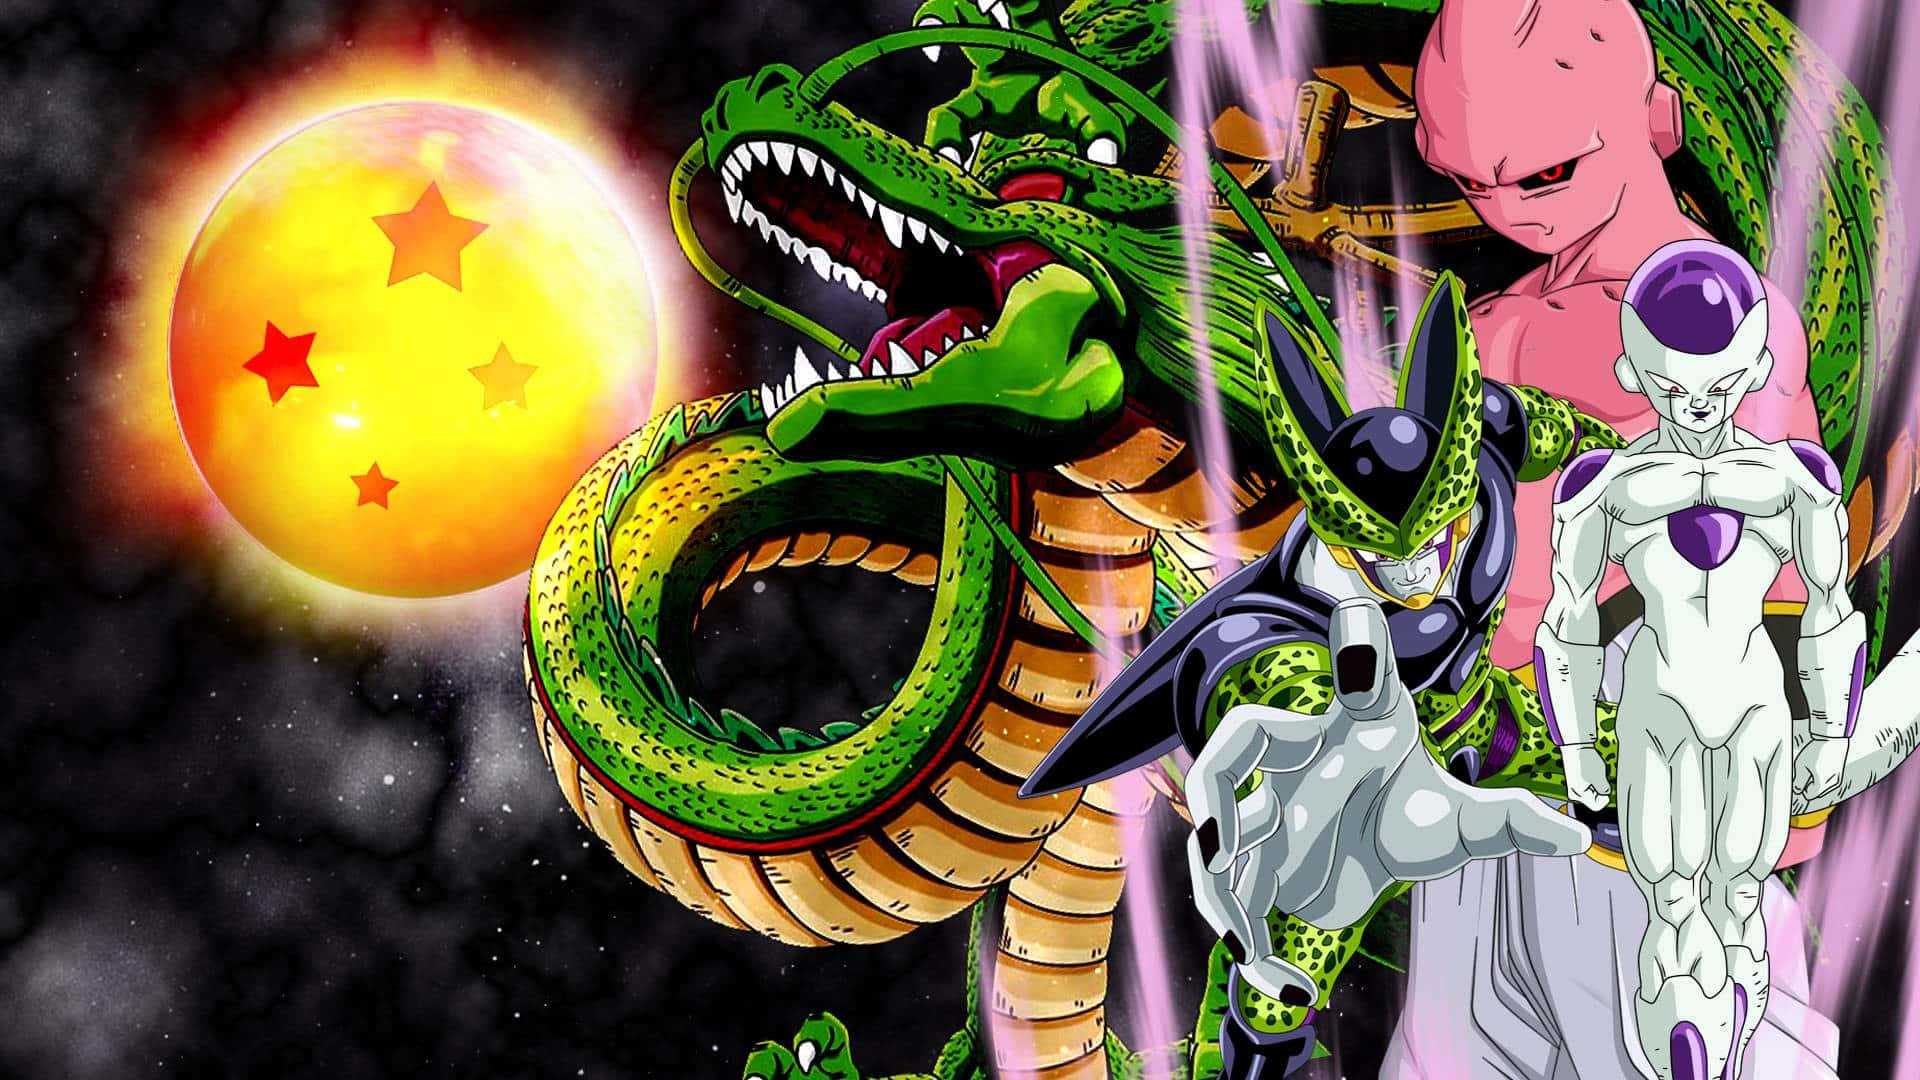 Buu Brings Fun and Excitement to Life Wallpaper